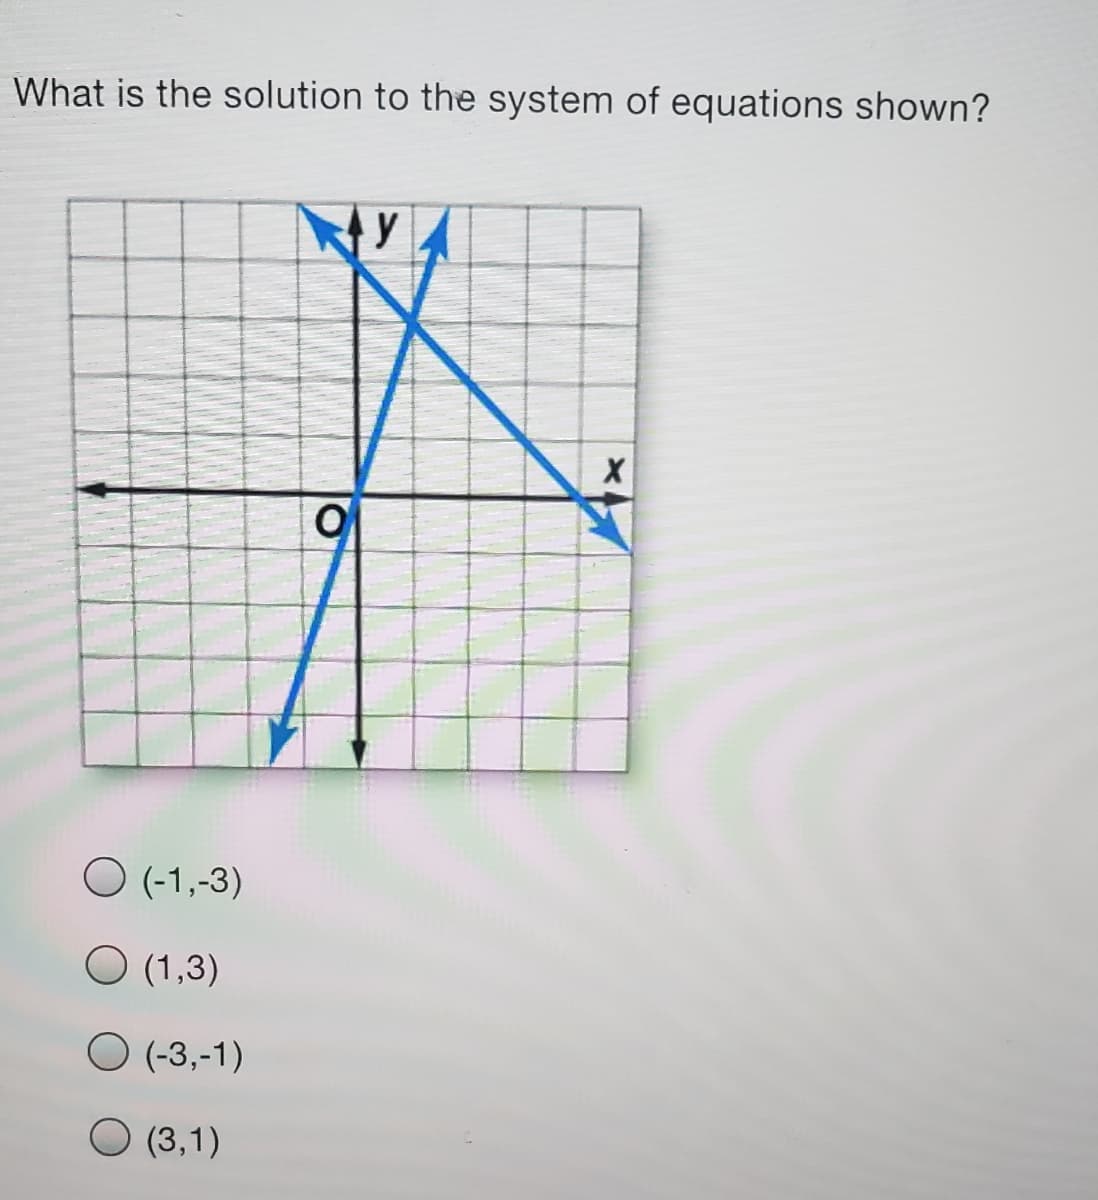 What is the solution to the system of equations shown?
トイy
O (-1,-3)
O (1,3)
O (-3,-1)
O (3,1)
